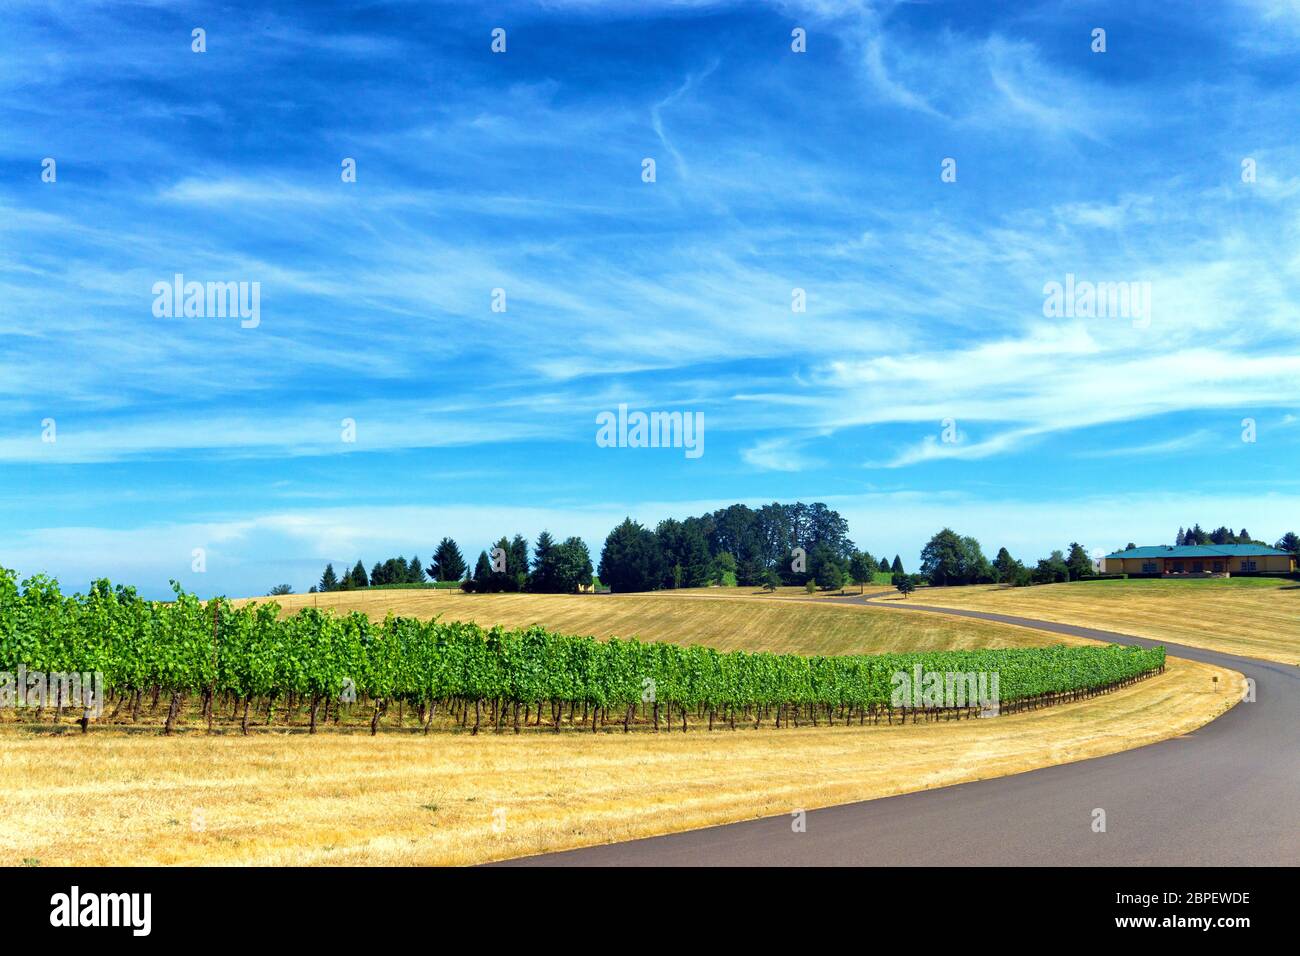 Road passing by a vineyard with a beautiful blue sky in Dundee, Oregon Stock Photo